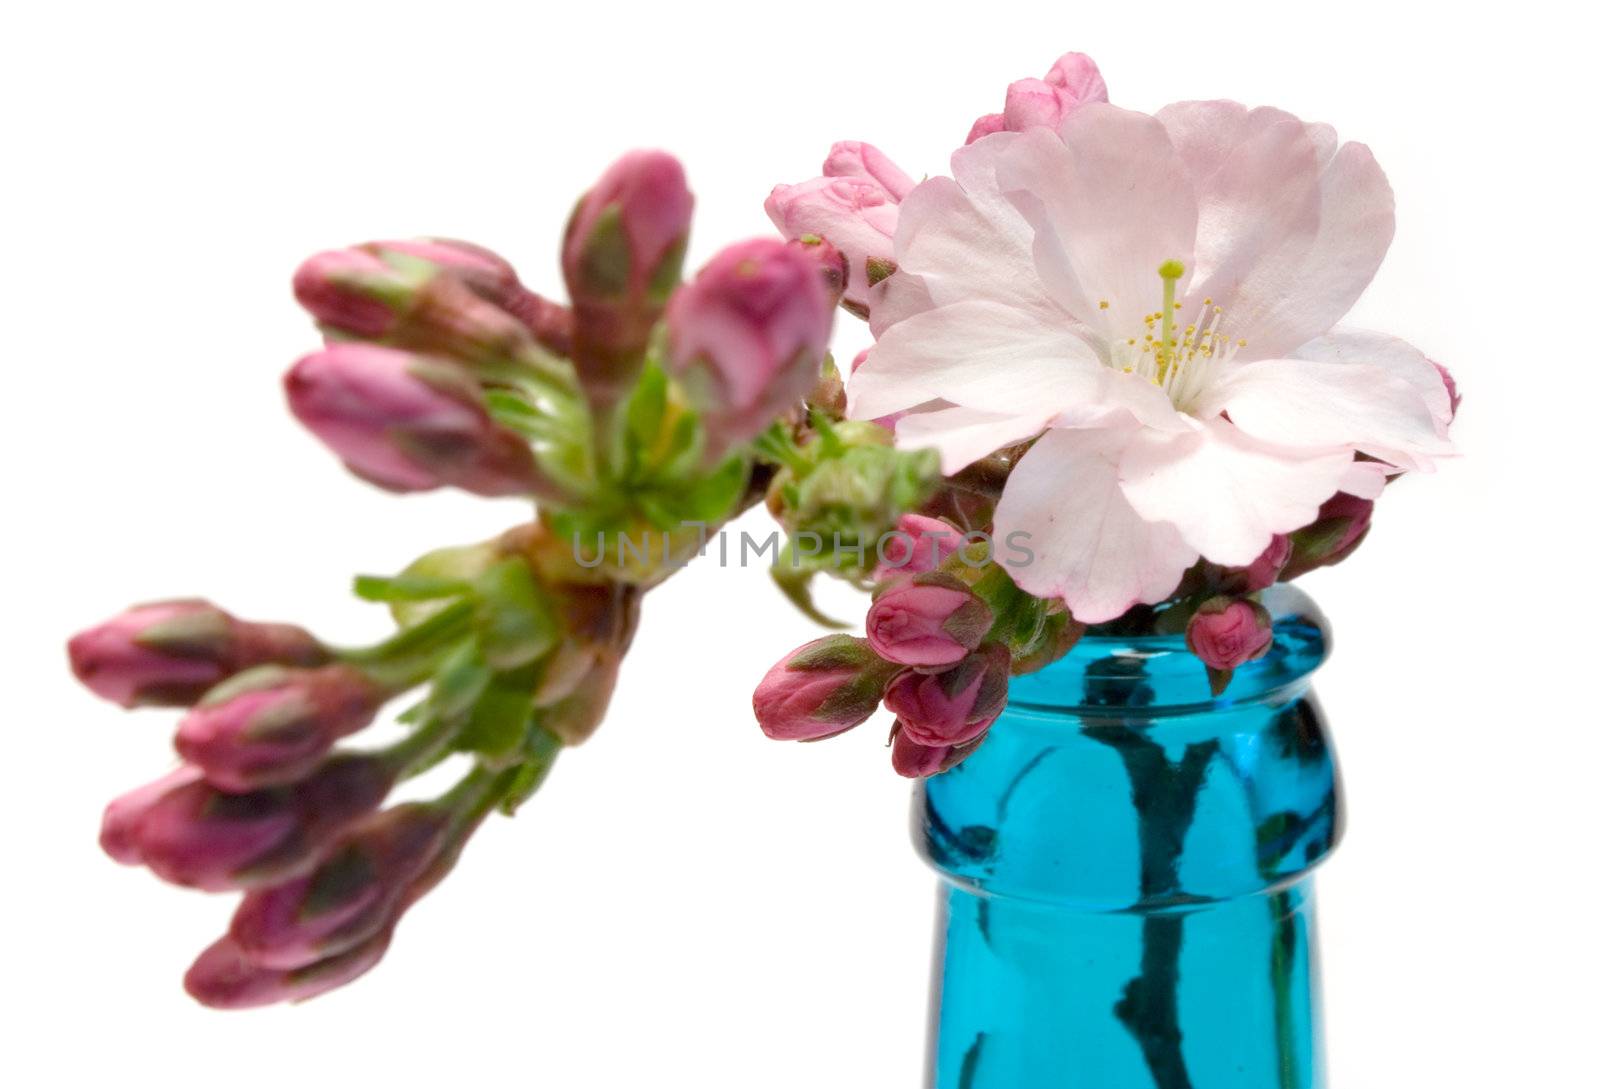 Flower in a blue bottle isolated on a white background.